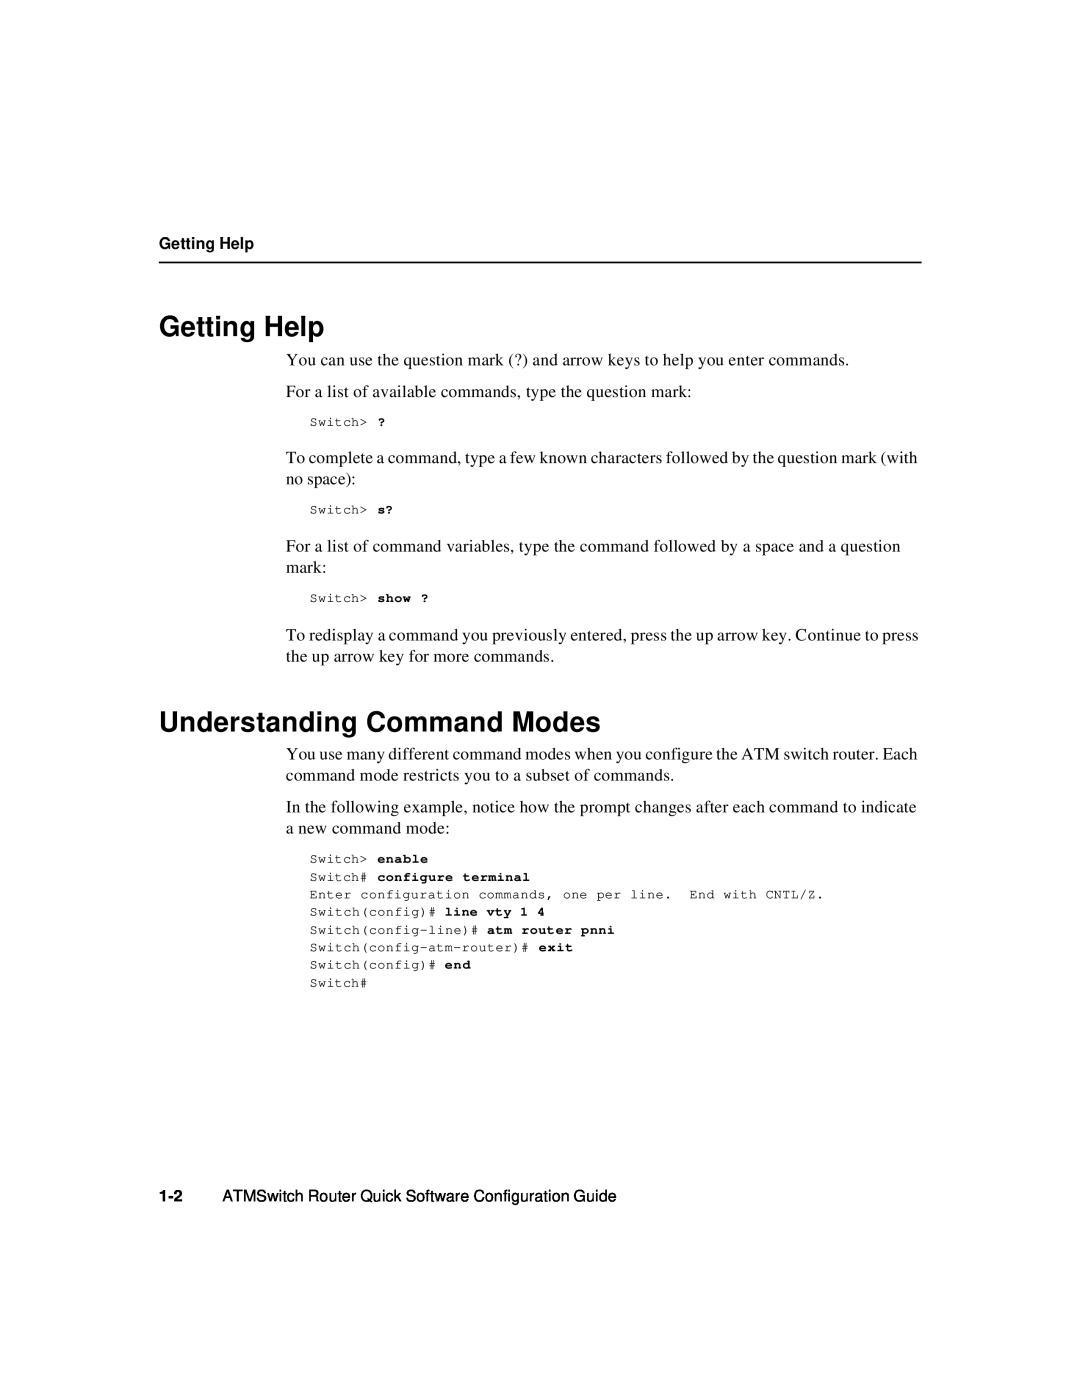 Cisco Systems 78-6897-01 manual Getting Help, Understanding Command Modes 